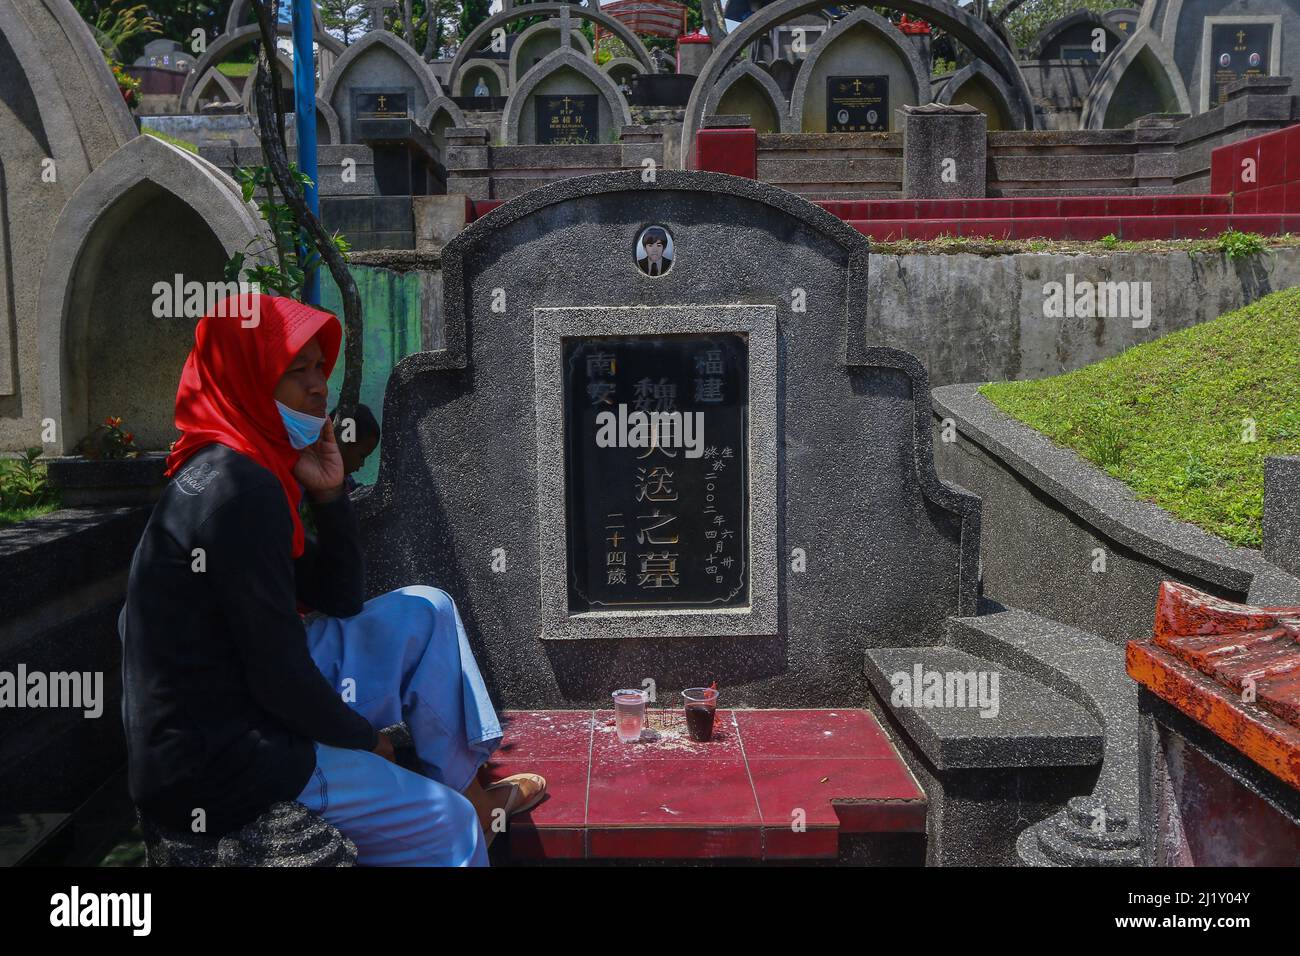 A worker grave wait a Indonesian ethnic Chinese family to visit a tomb during the Cheng Beng or Qingming Festival, also known as Tomb Sweeping Day, at a Chinese cemetery in Bogor, West Java, Indonesia on March 27, 2021. The Qingming Festival or Cheng Beng is an annual Chinese ethnic ritual to remember, honor, and pilgrimage to the ancestors grave according to Confucianism. Everyone prays in front of the ancestors, sweeps the tomb and prays with incense, money, paper prayers and various accessories, as an offering to the ancestors. (Photo by Andi M Ridwan/INA Photo Agency/Sipa USA) Stock Photo